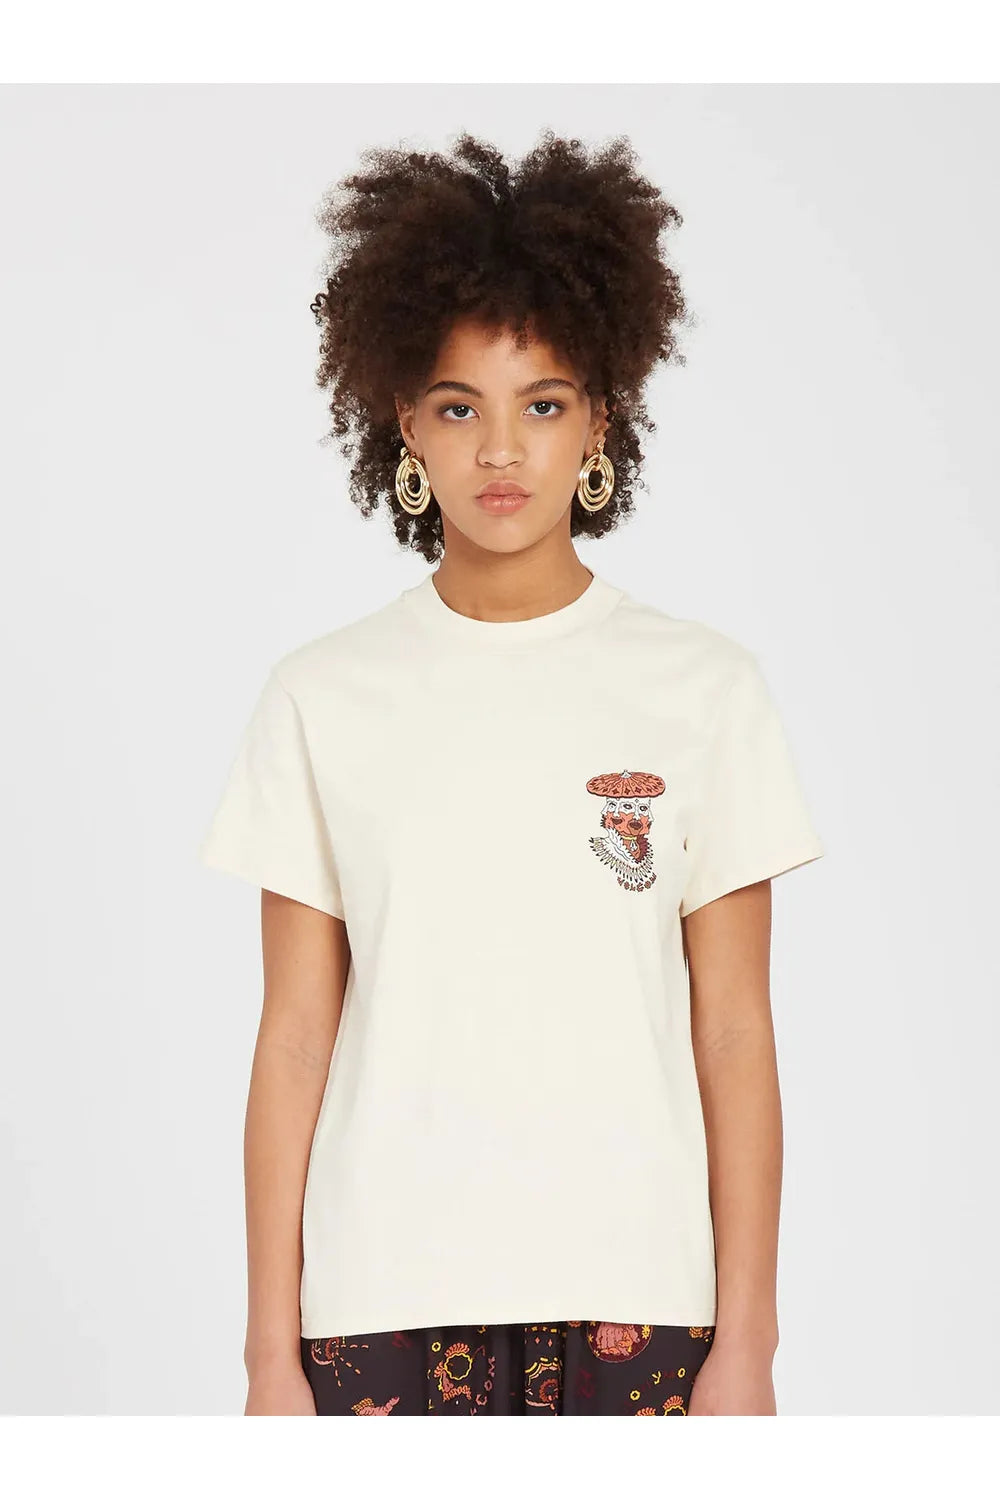 Volcom Connected Minds Tee